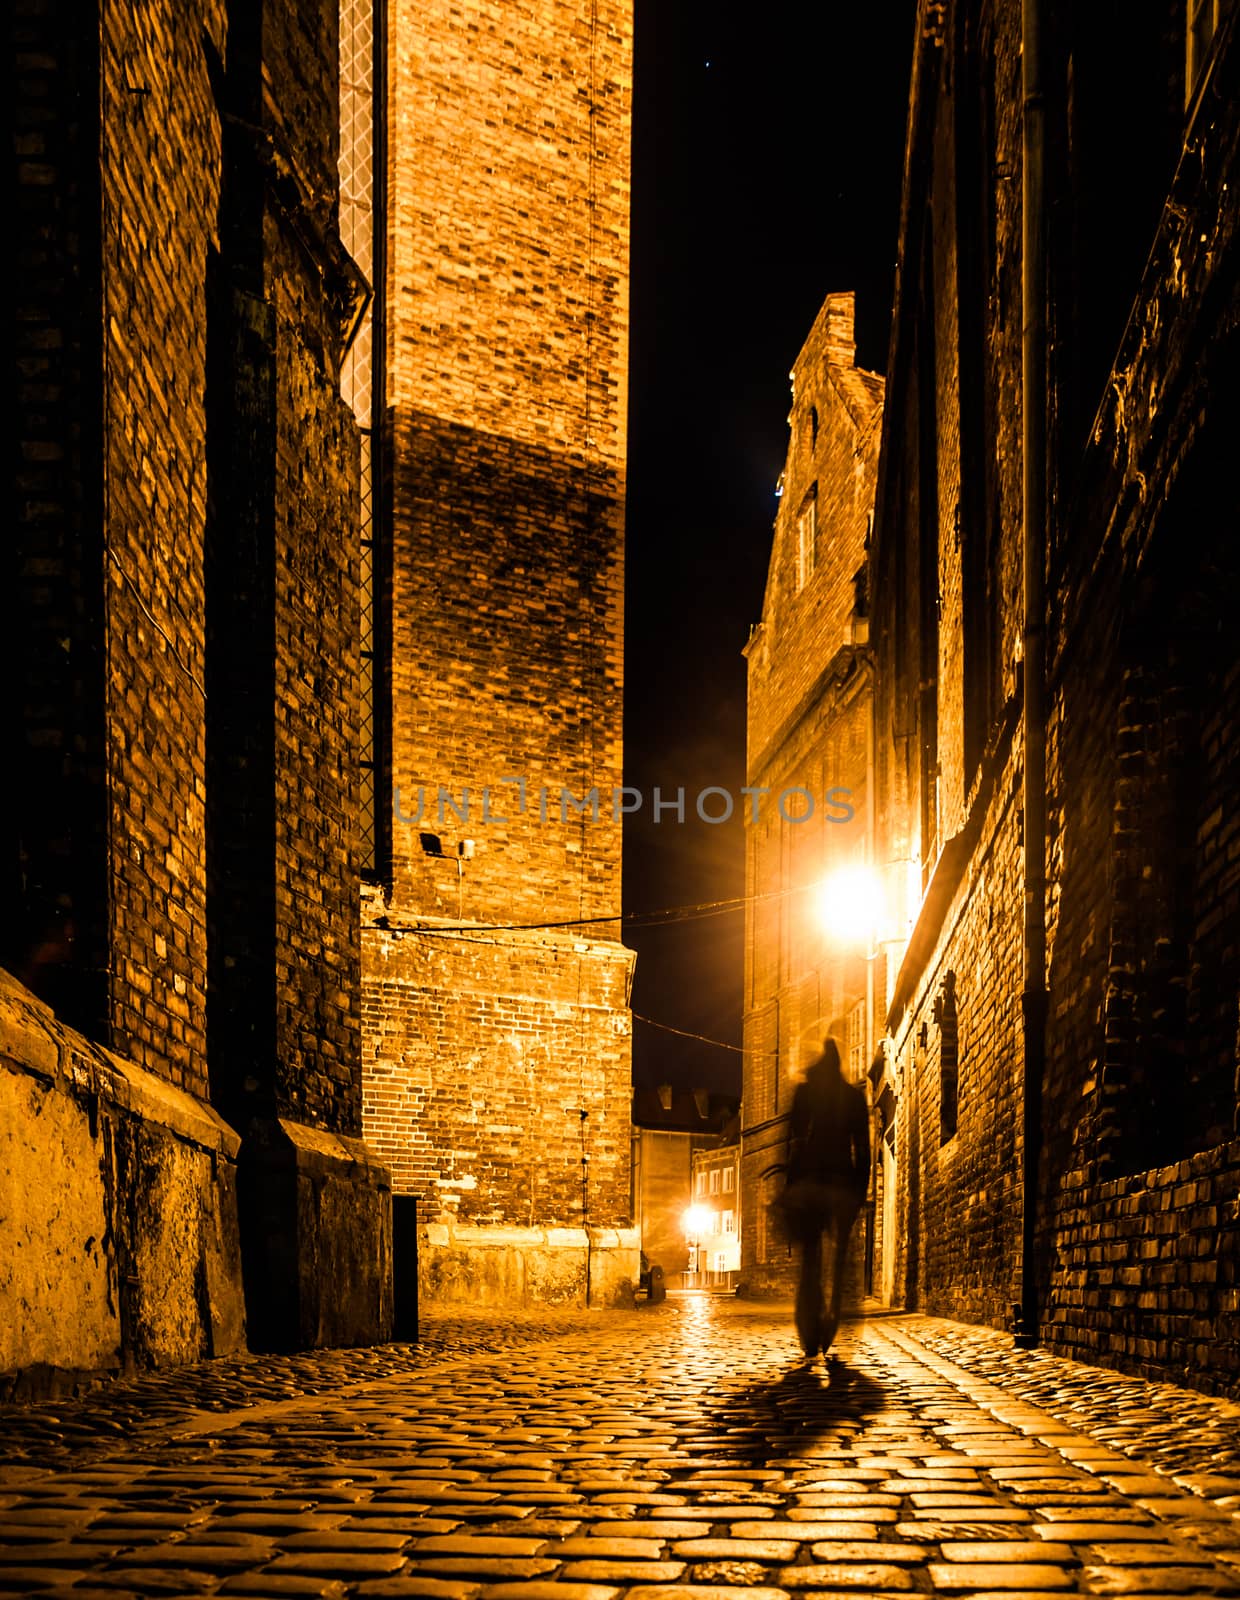 Cobbled street of Old Town with dark blurred silhouette of person. Evokes Jack the Ripper.